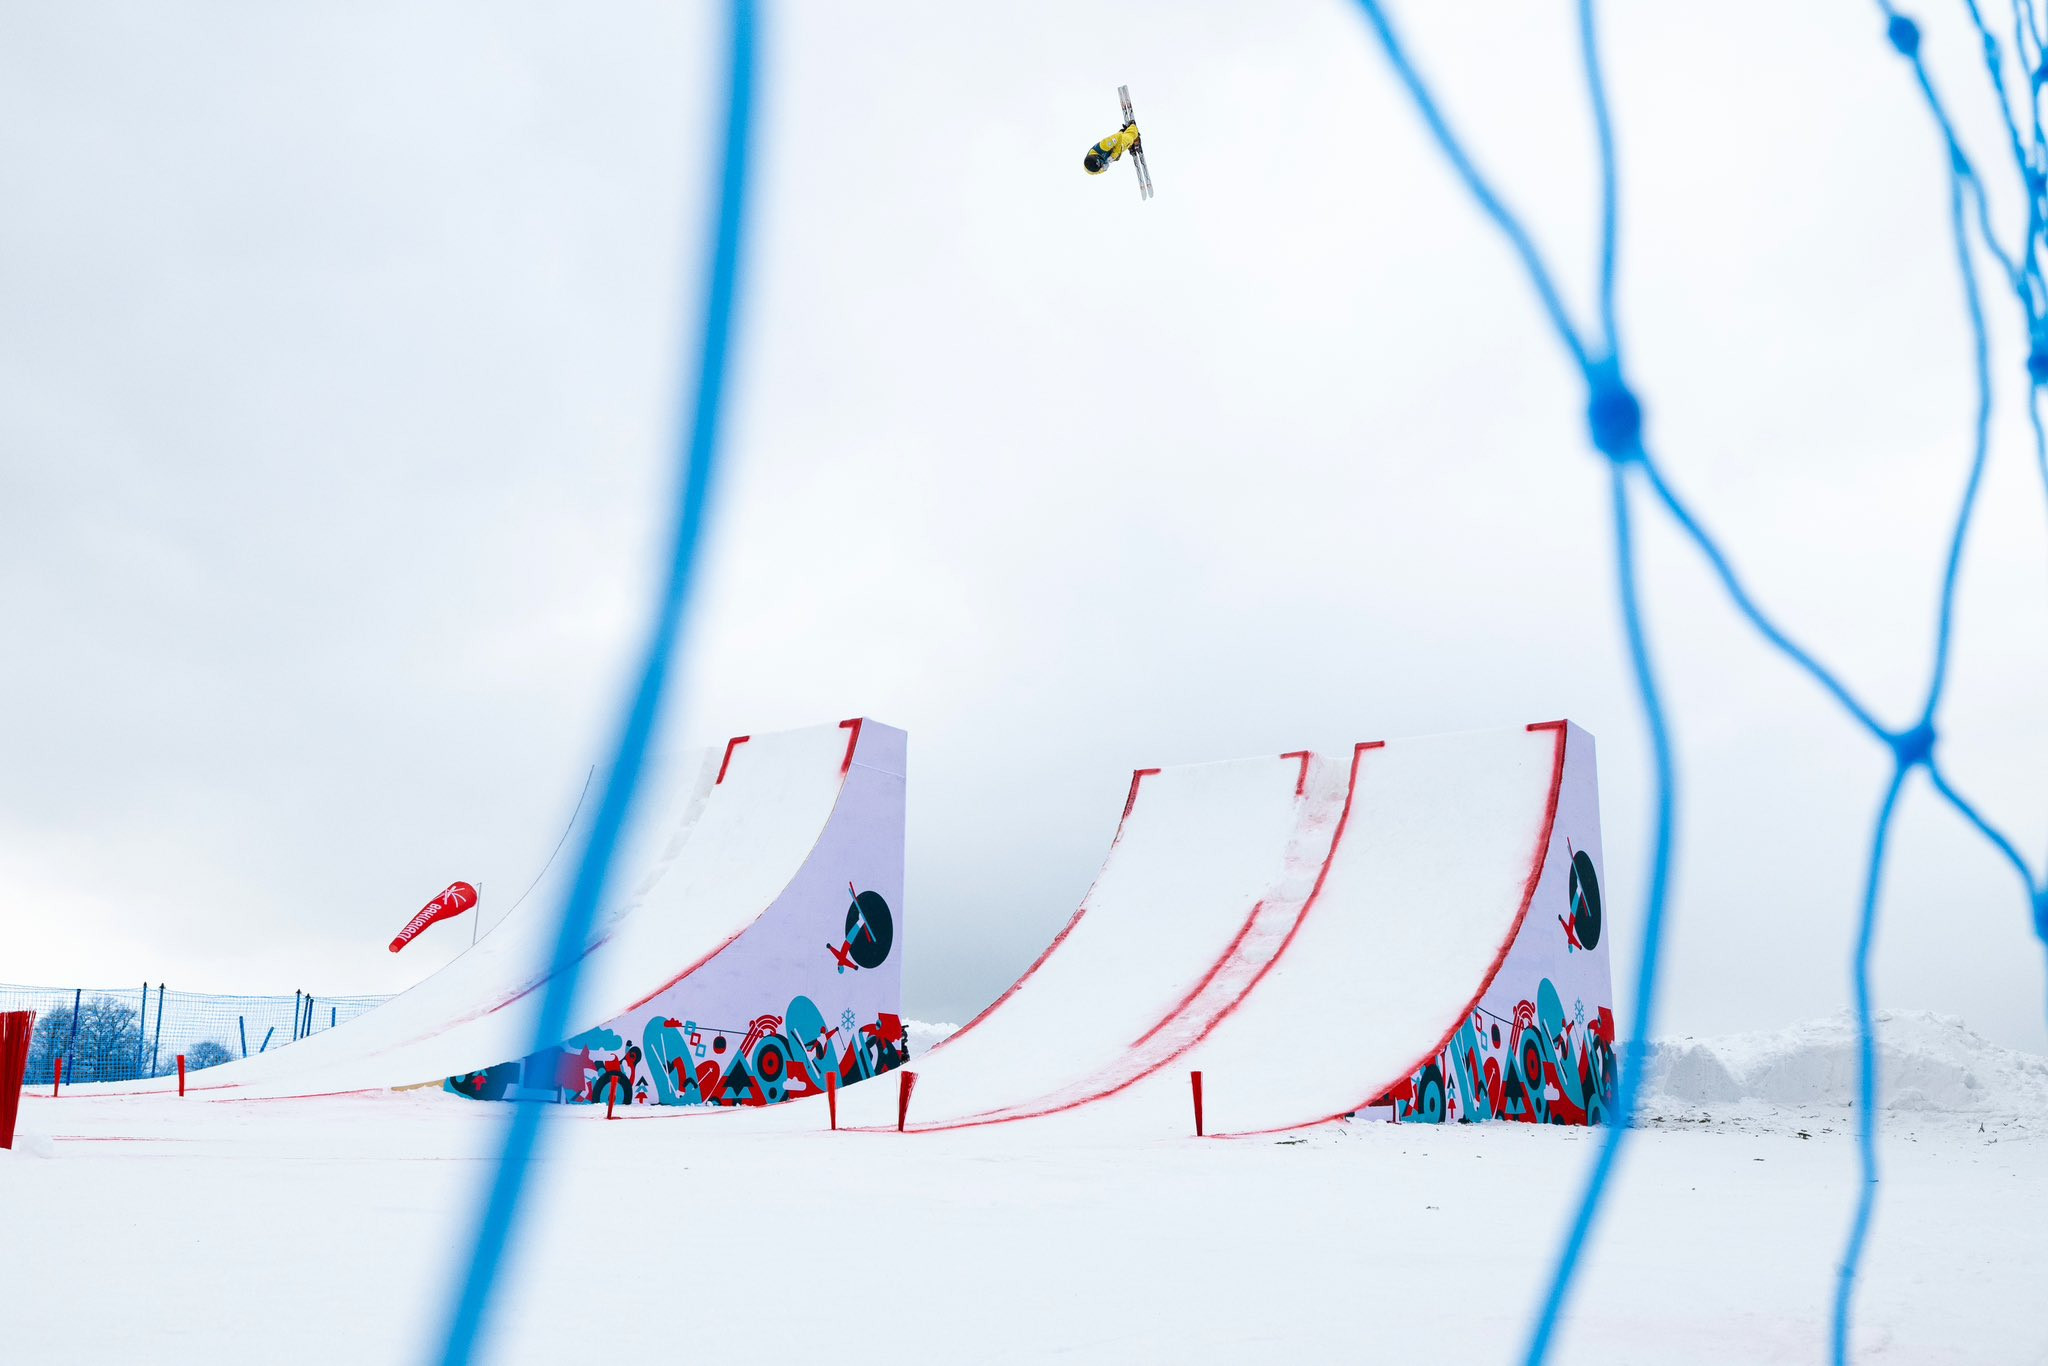 The FIS Freestyle Ski, Snowboard and Freeski World Championships are scheduled to continue until March 5 ©FIS